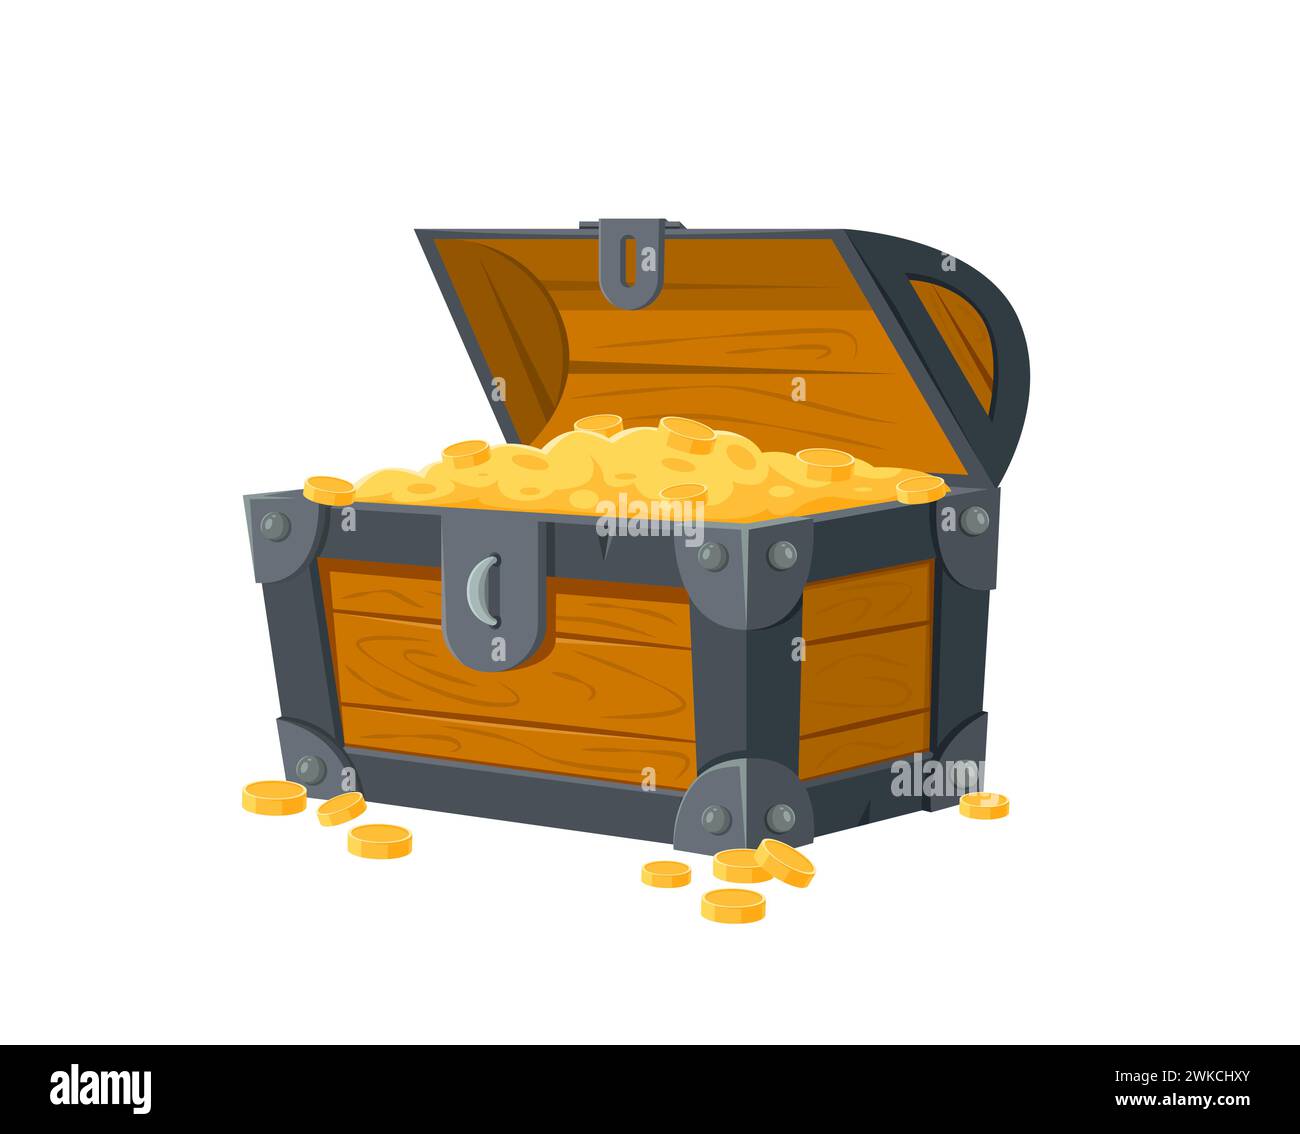 Cartoon pirate treasure chest with gold. Isolated vector old trunk or box, filled with golden coins. Antique medieval coffer, open and overflowing with wealth, game asset, loot of corsair adventures Stock Vector